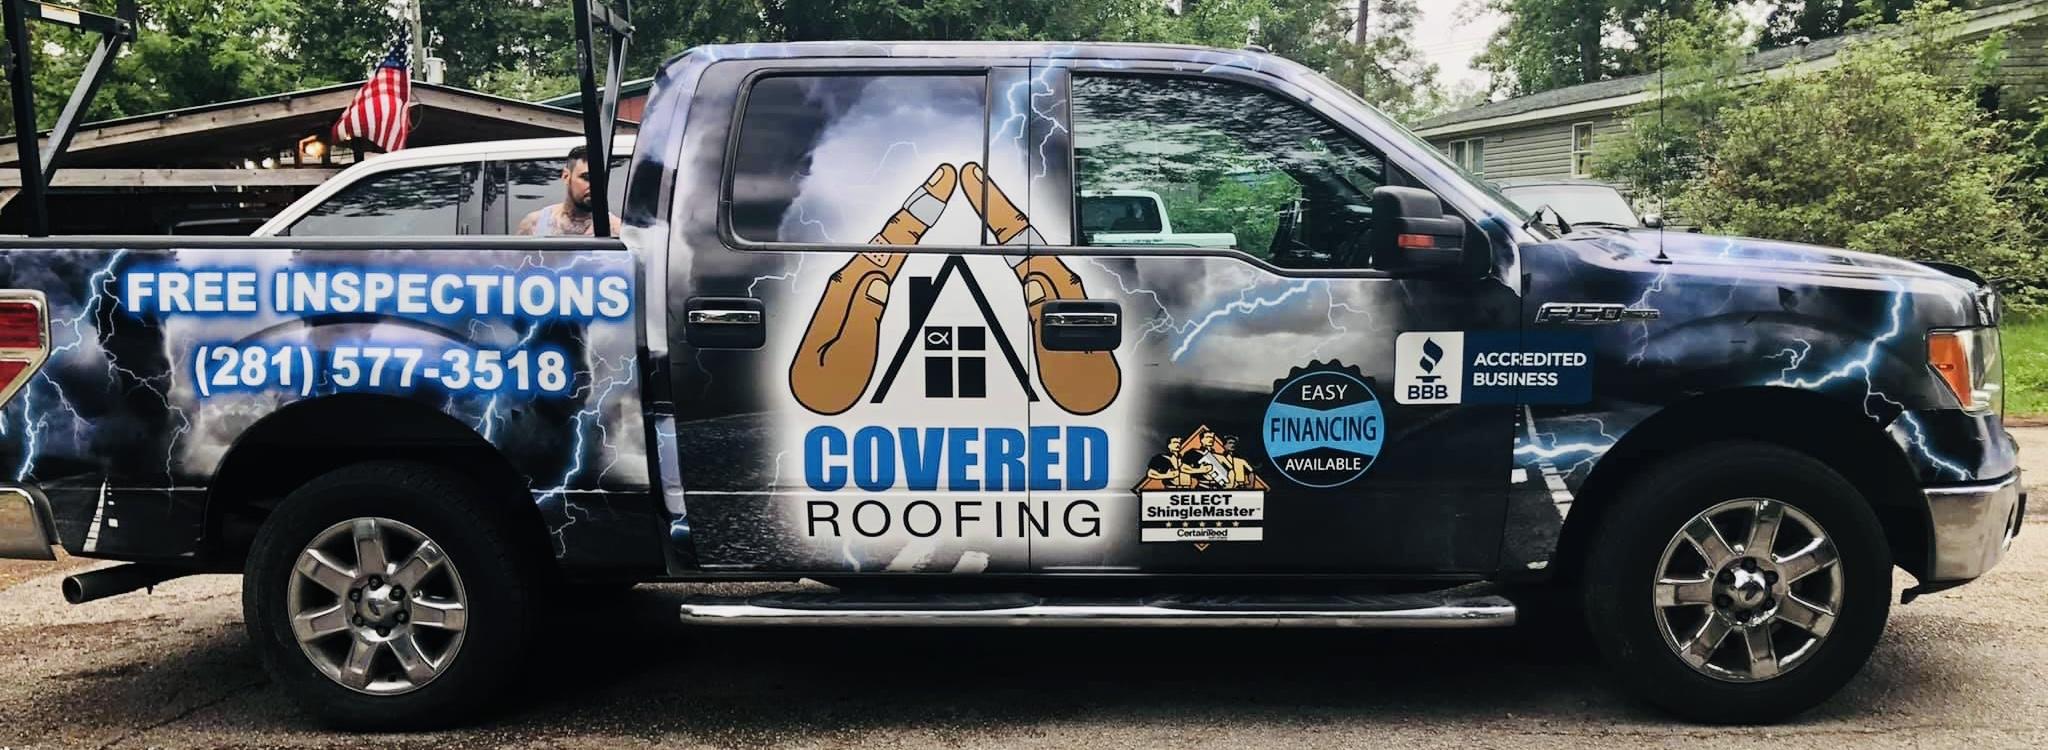 Covered Roofing,LLC | 527 N Frazier St, Conroe, TX 77301, United States | Phone: (281) 577-3518